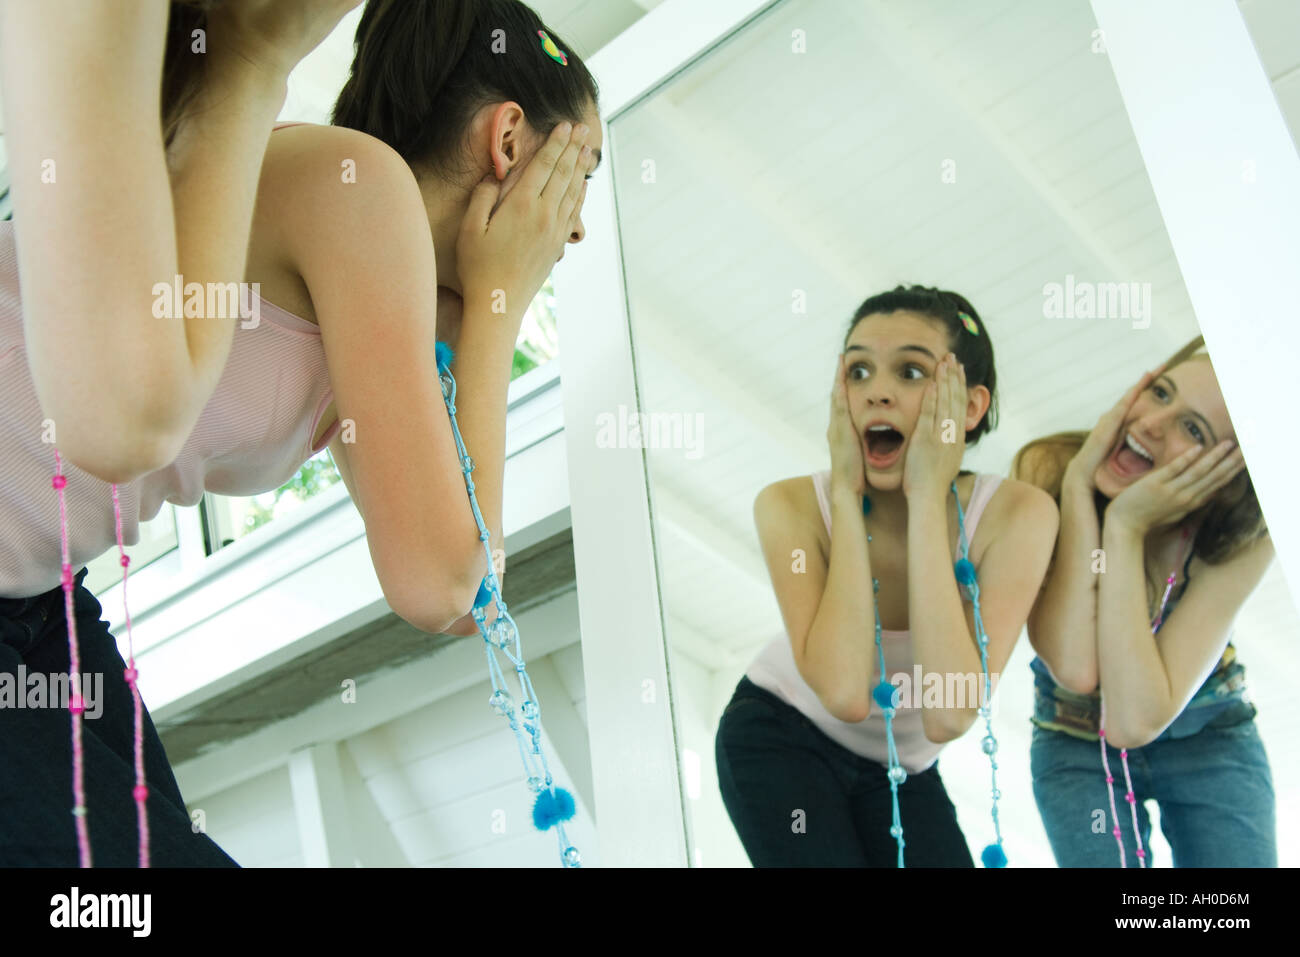 Two young friends bending over, looking at selves in mirror, hands on faces Stock Photo